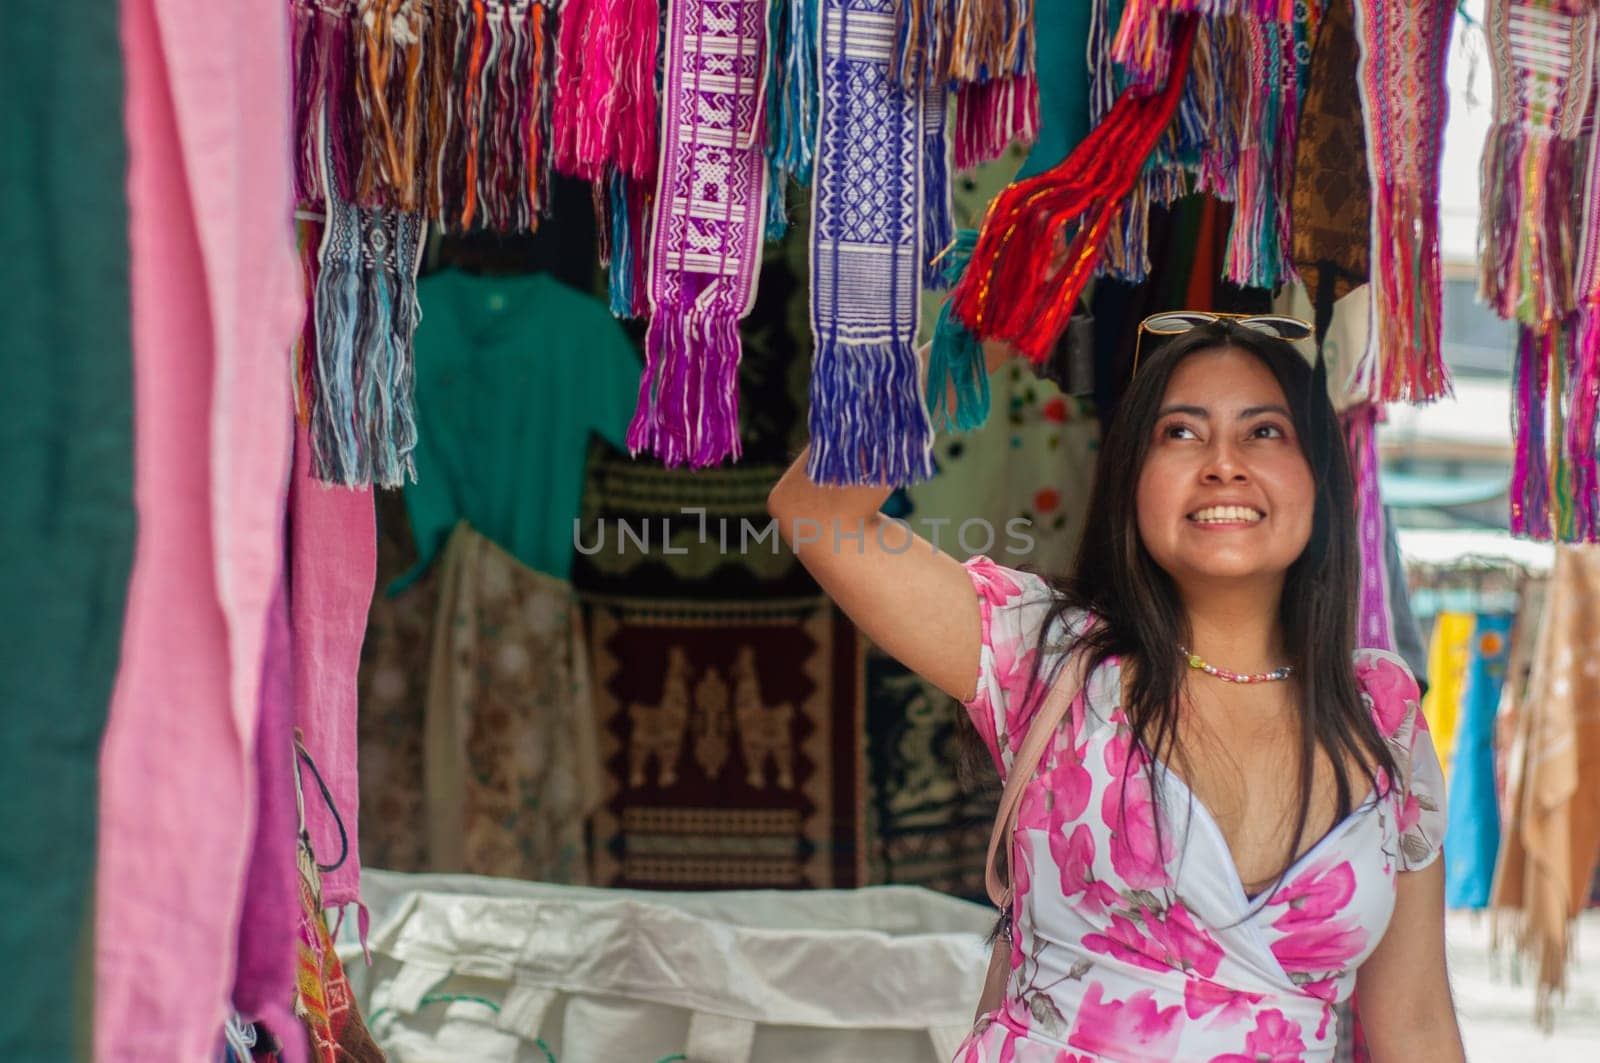 A cheerful woman goes sightseeing and chooses a brightly colored scarf from an assortment of handcrafted fabrics displayed at an open-air market stall. High quality photo